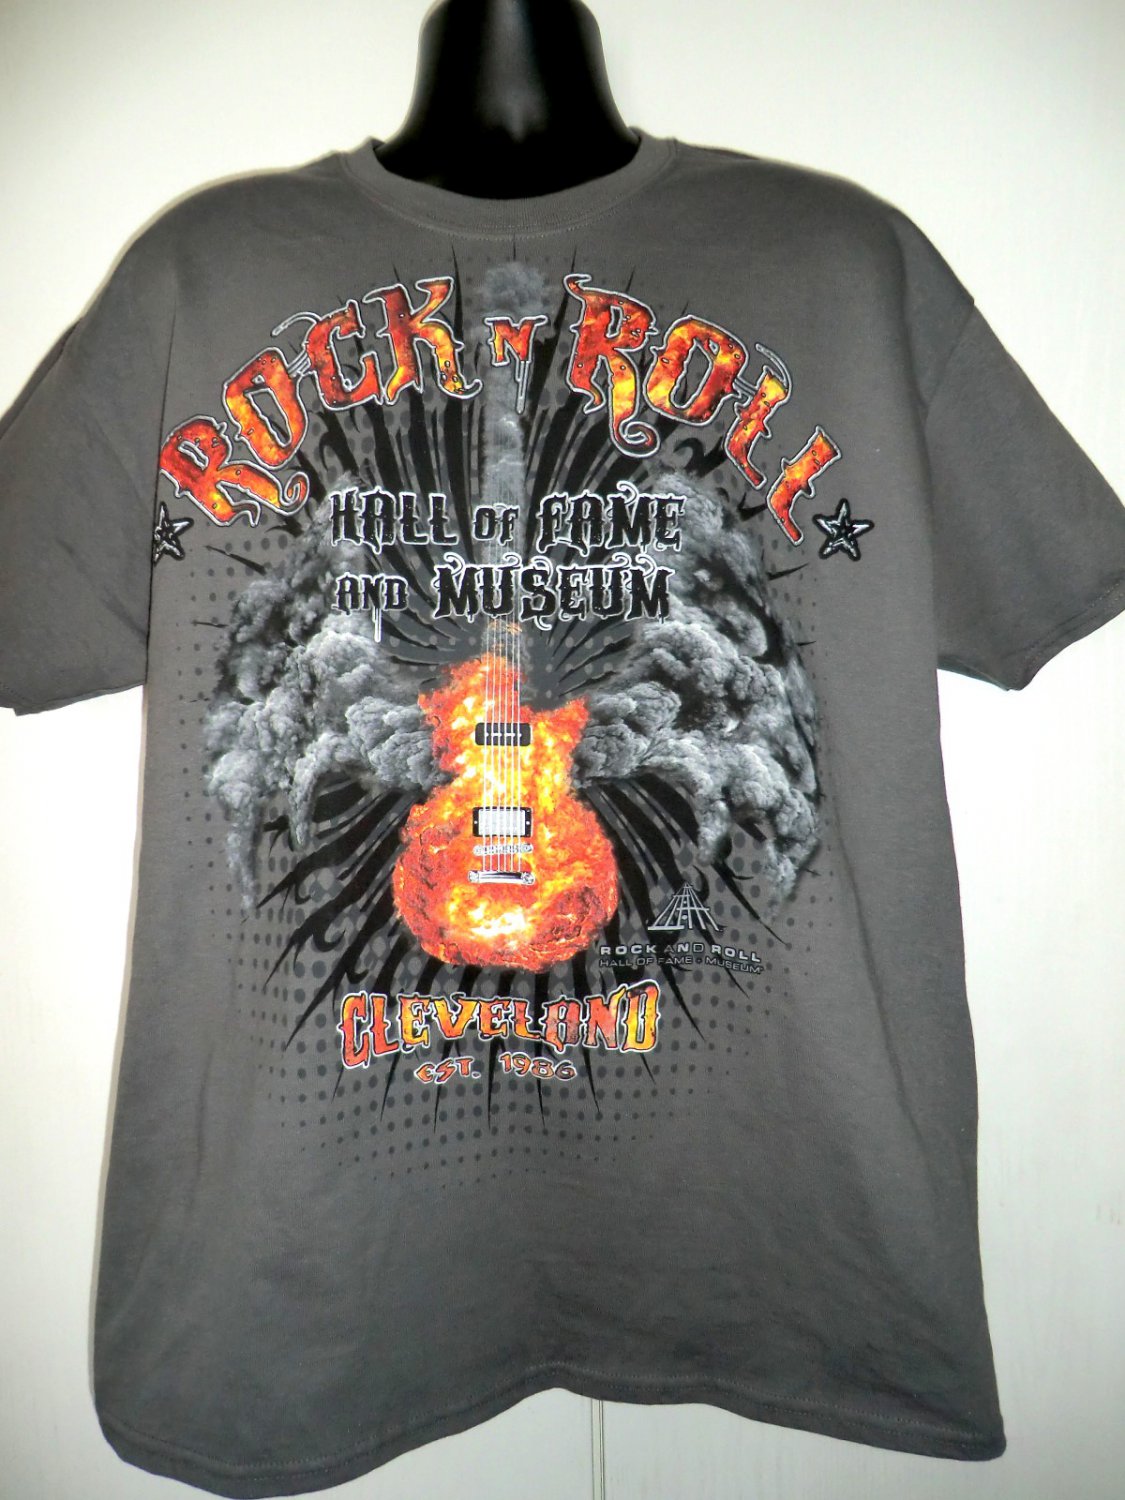 SOLD! Rock And Roll Hall Of Fame 2013 Inductees T-Shirt Size XL NWT New!